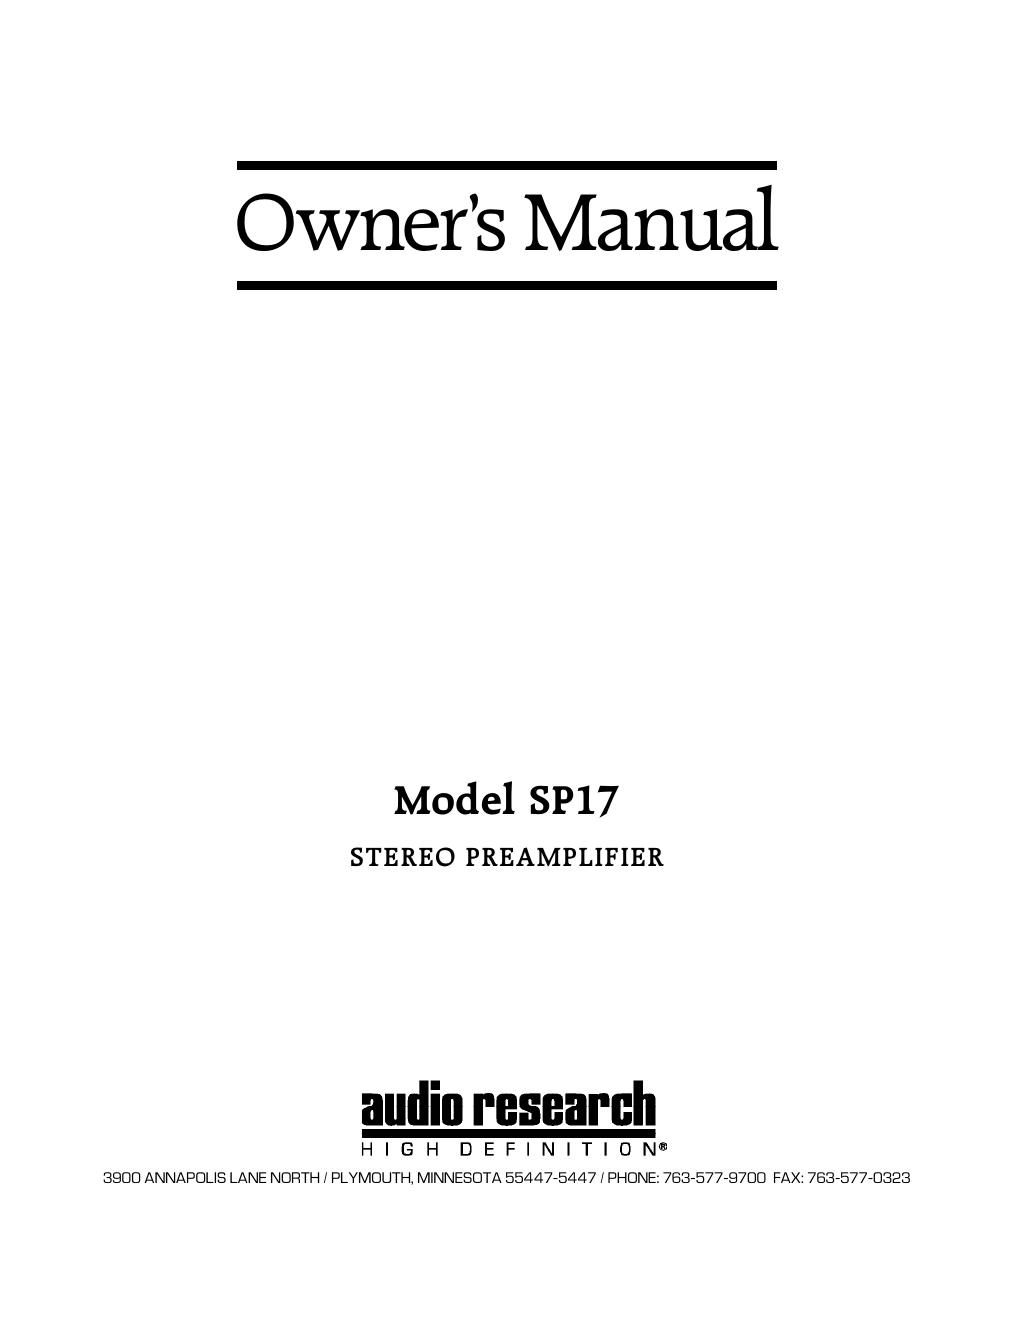 audio research sp 17 owners manual